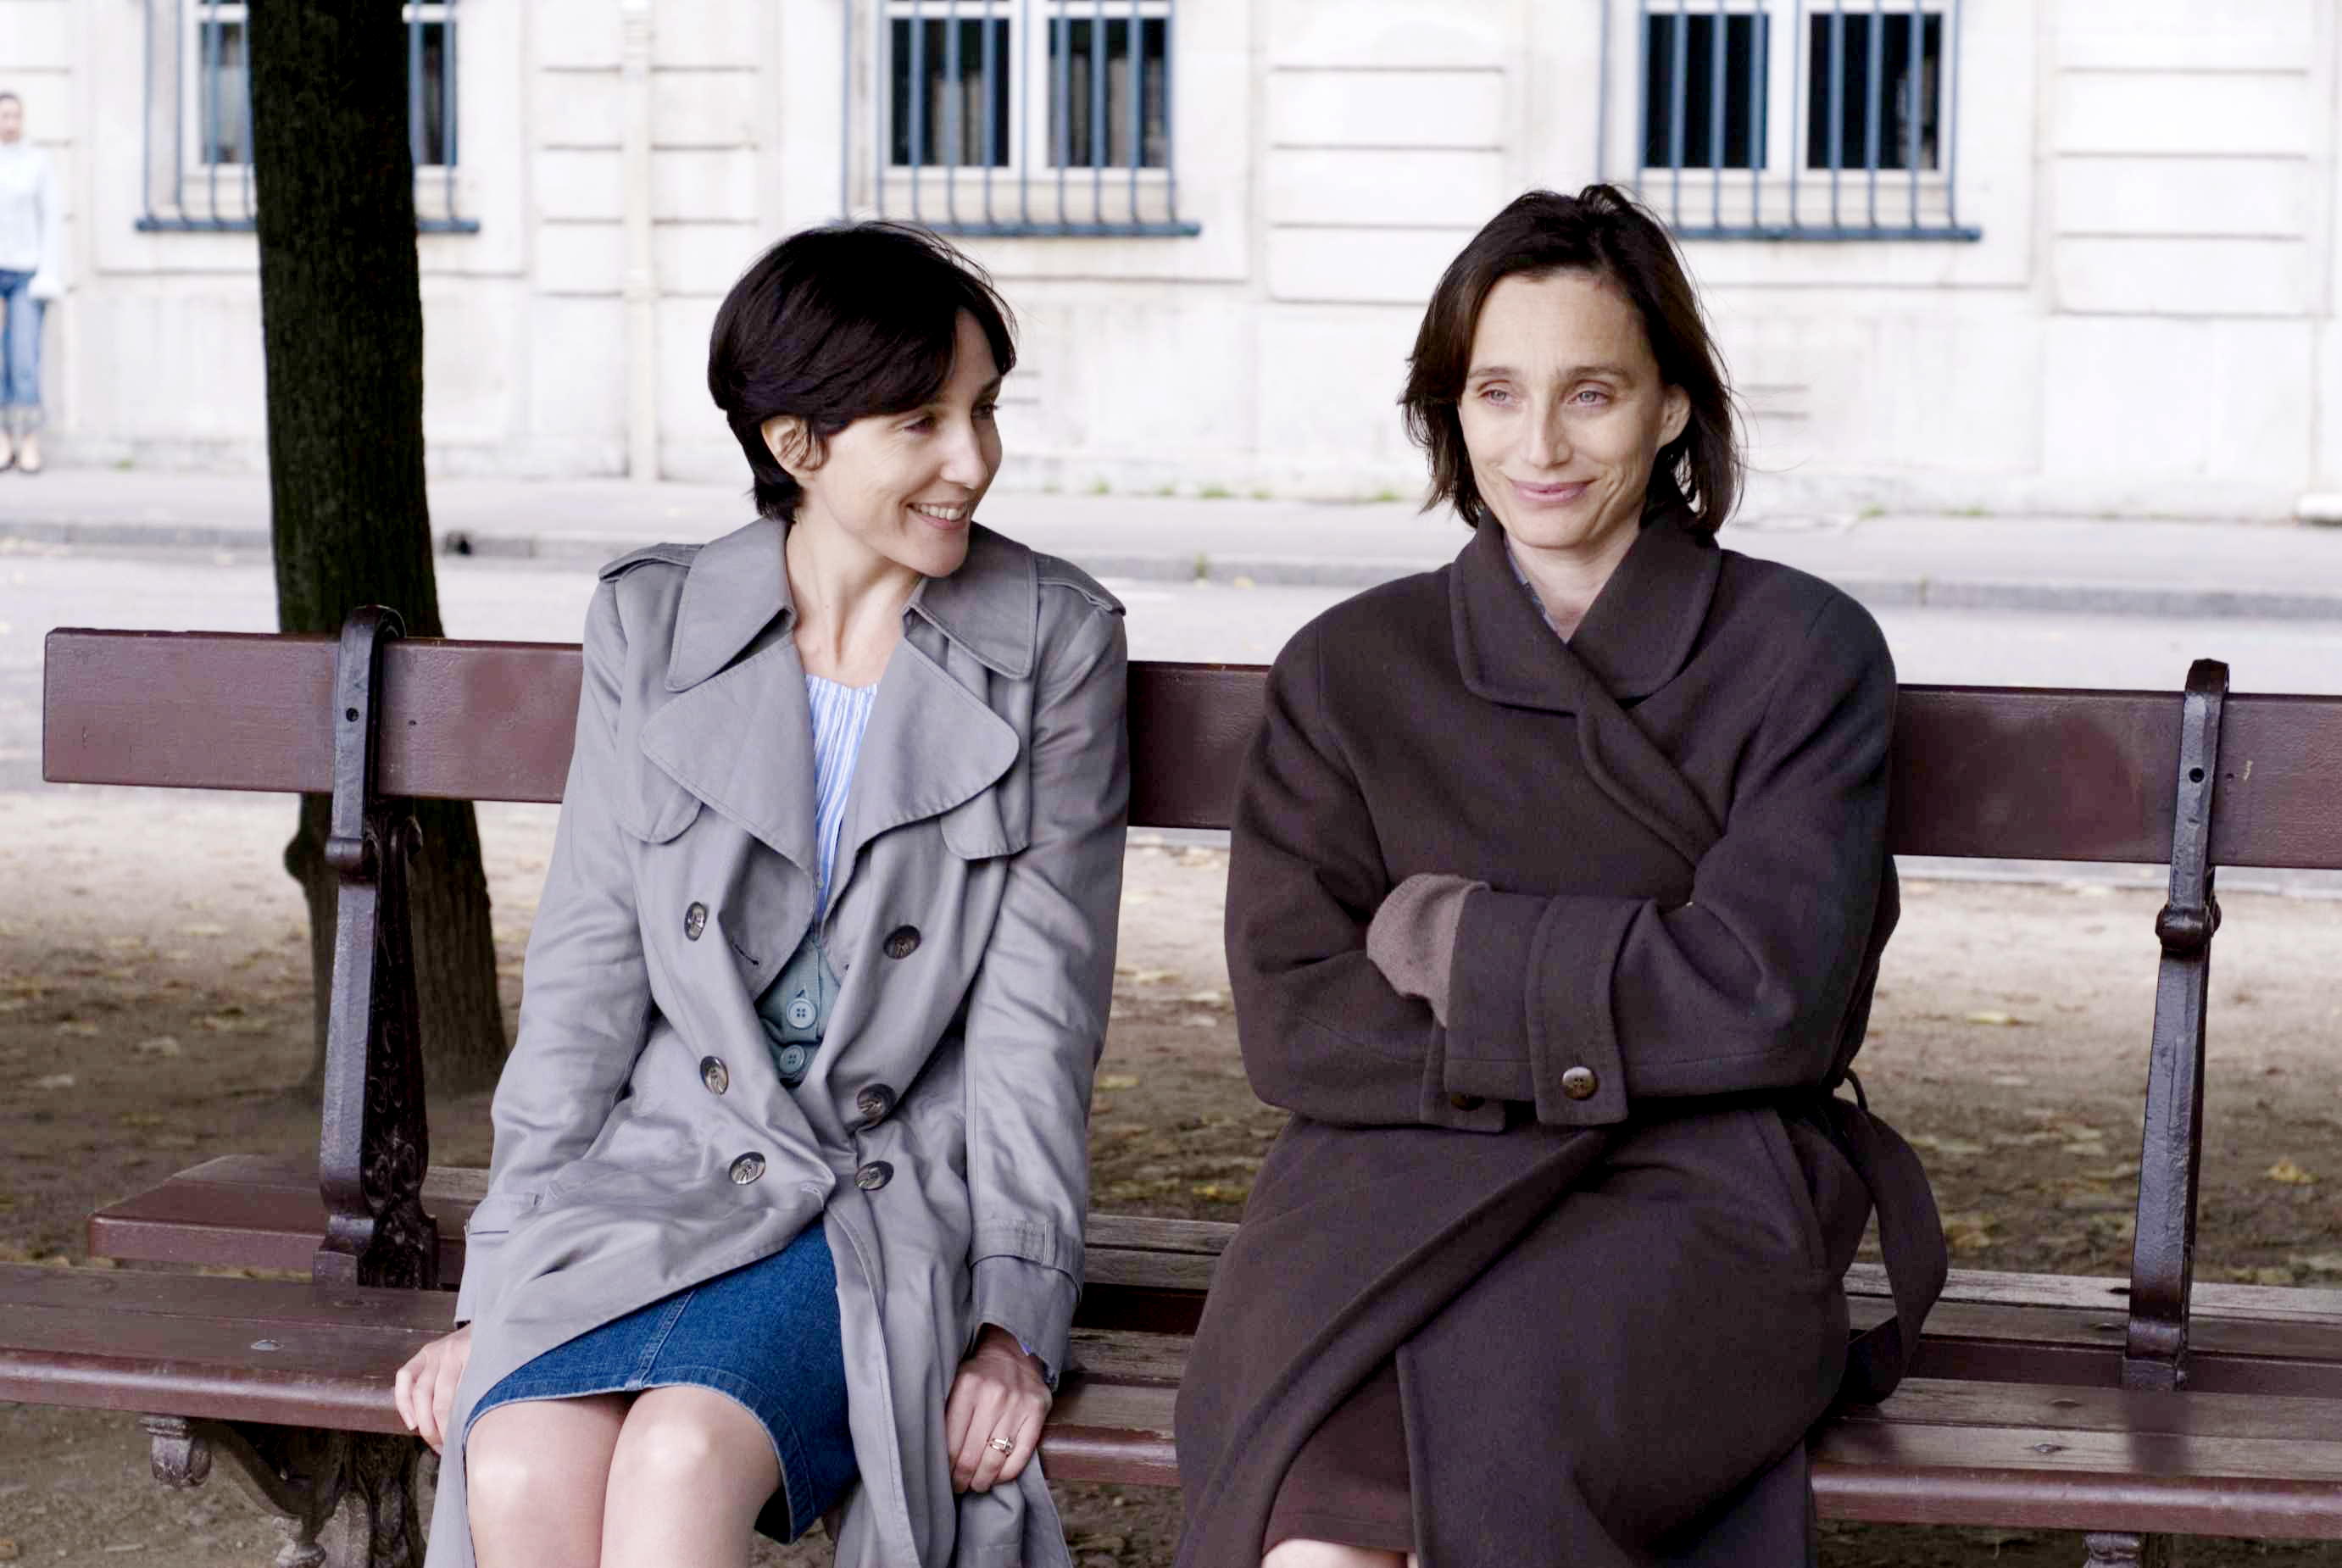 Elsa Zylberstein stars as Lea and Kristin Scott Thomas stars as Juliette Fontaine in Sony Pictures Classics' I've Loved You So Long (2008). Photo credit by Thierry Valletoux.